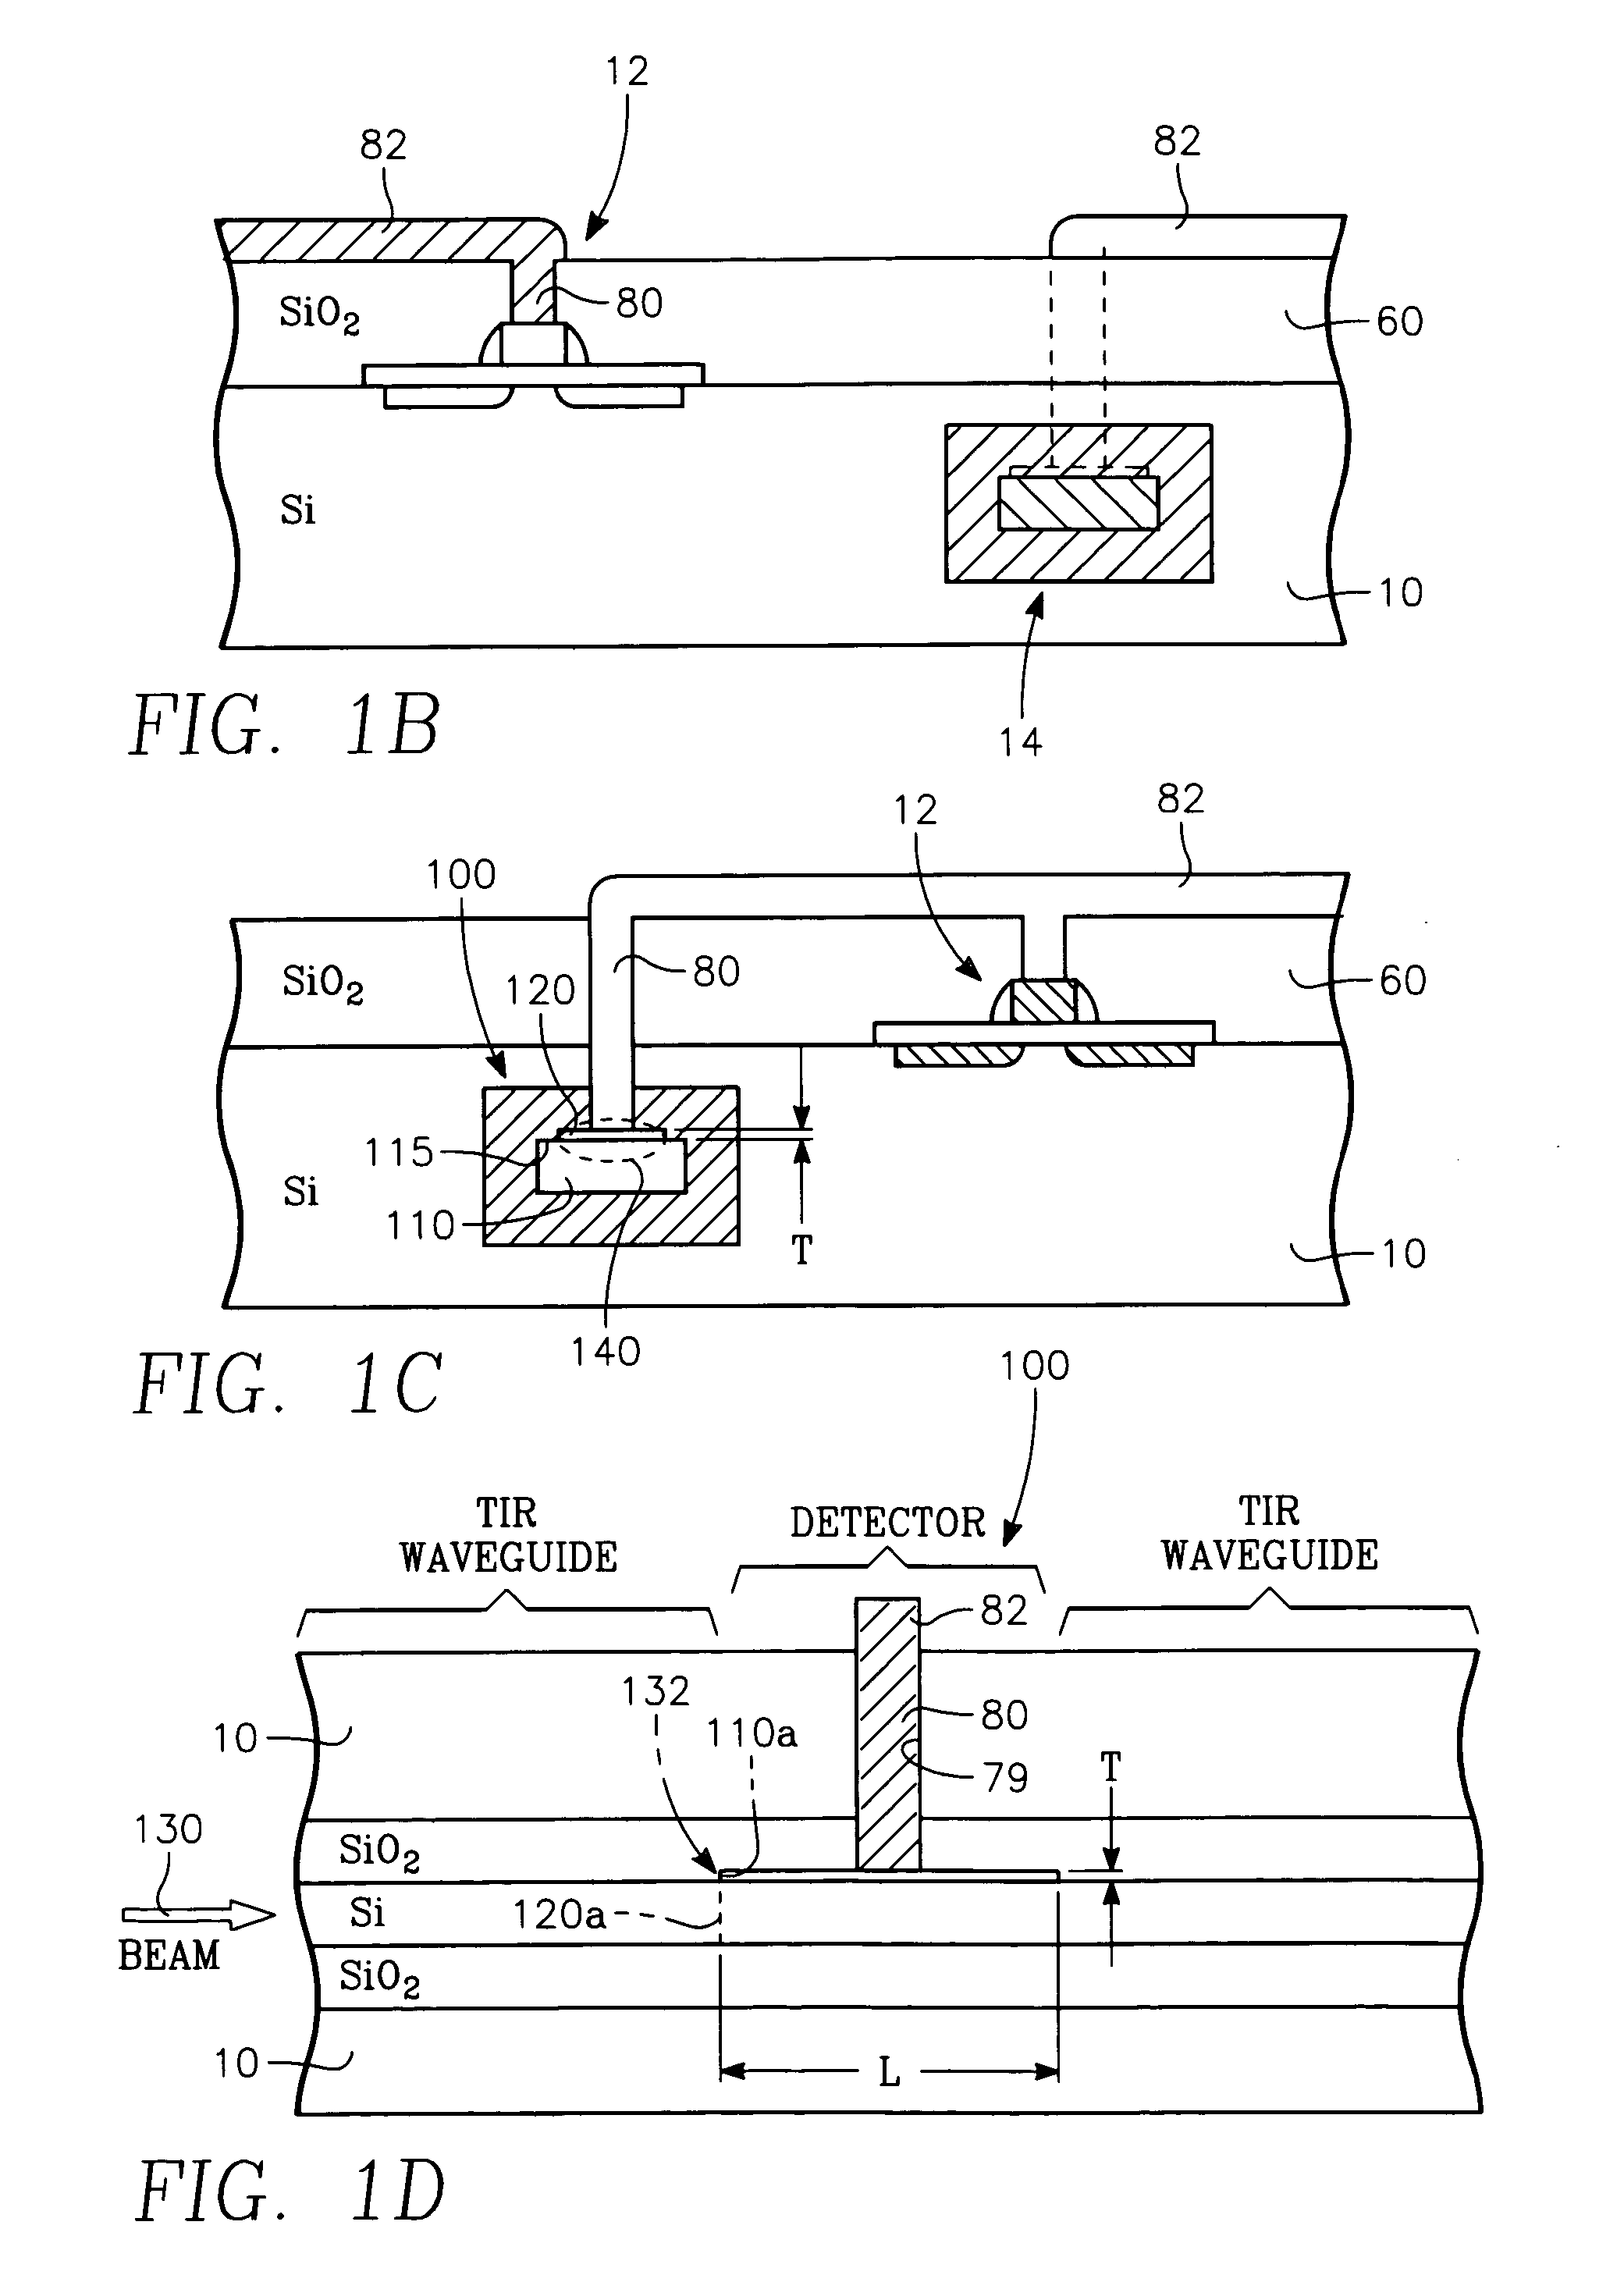 Planar integrated circuit including a plasmon waveguide-fed schottky barrier detector and transistors connected therewith